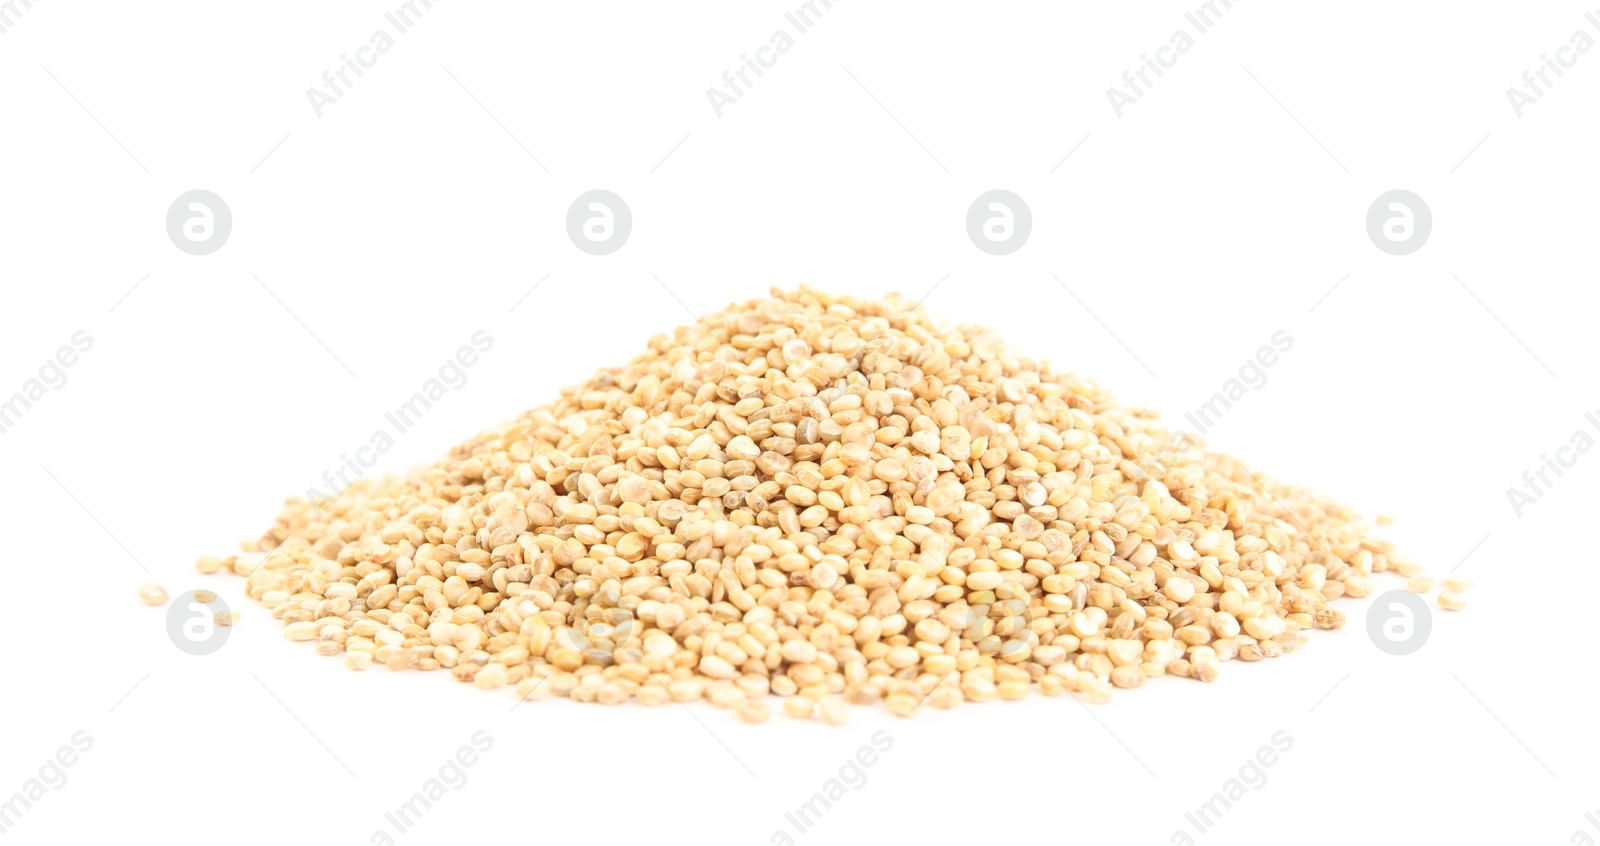 Photo of Pile of raw quinoa grains on white background